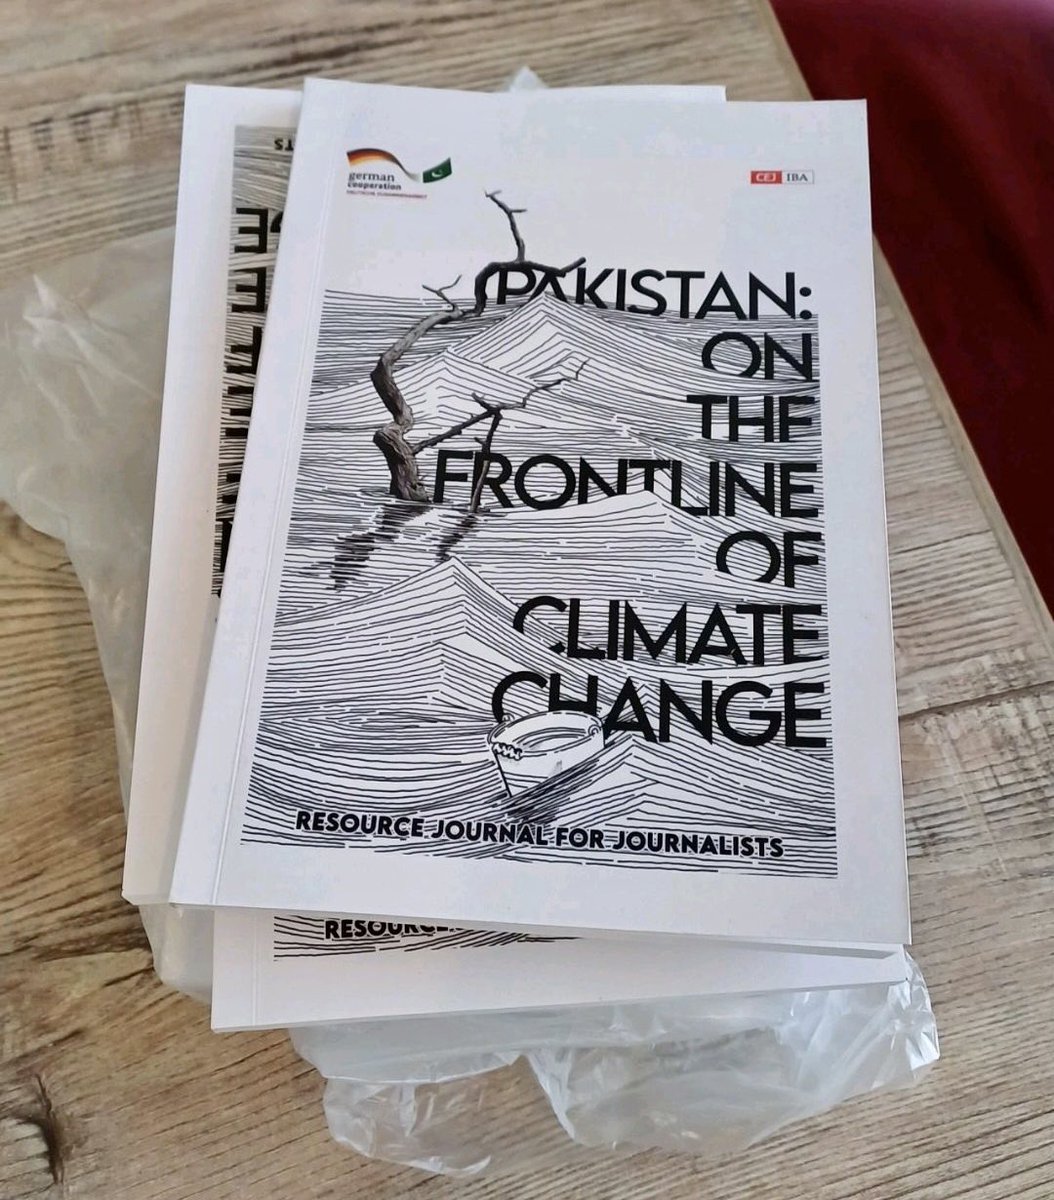 Pakistan is one of the countries most affected by #ClimateChange, from melting glaciers to evolving monsoon patterns that result in disastrous floods. Understanding how it impacts us all has never been more urgent. @LivingIndus @rinasaeed